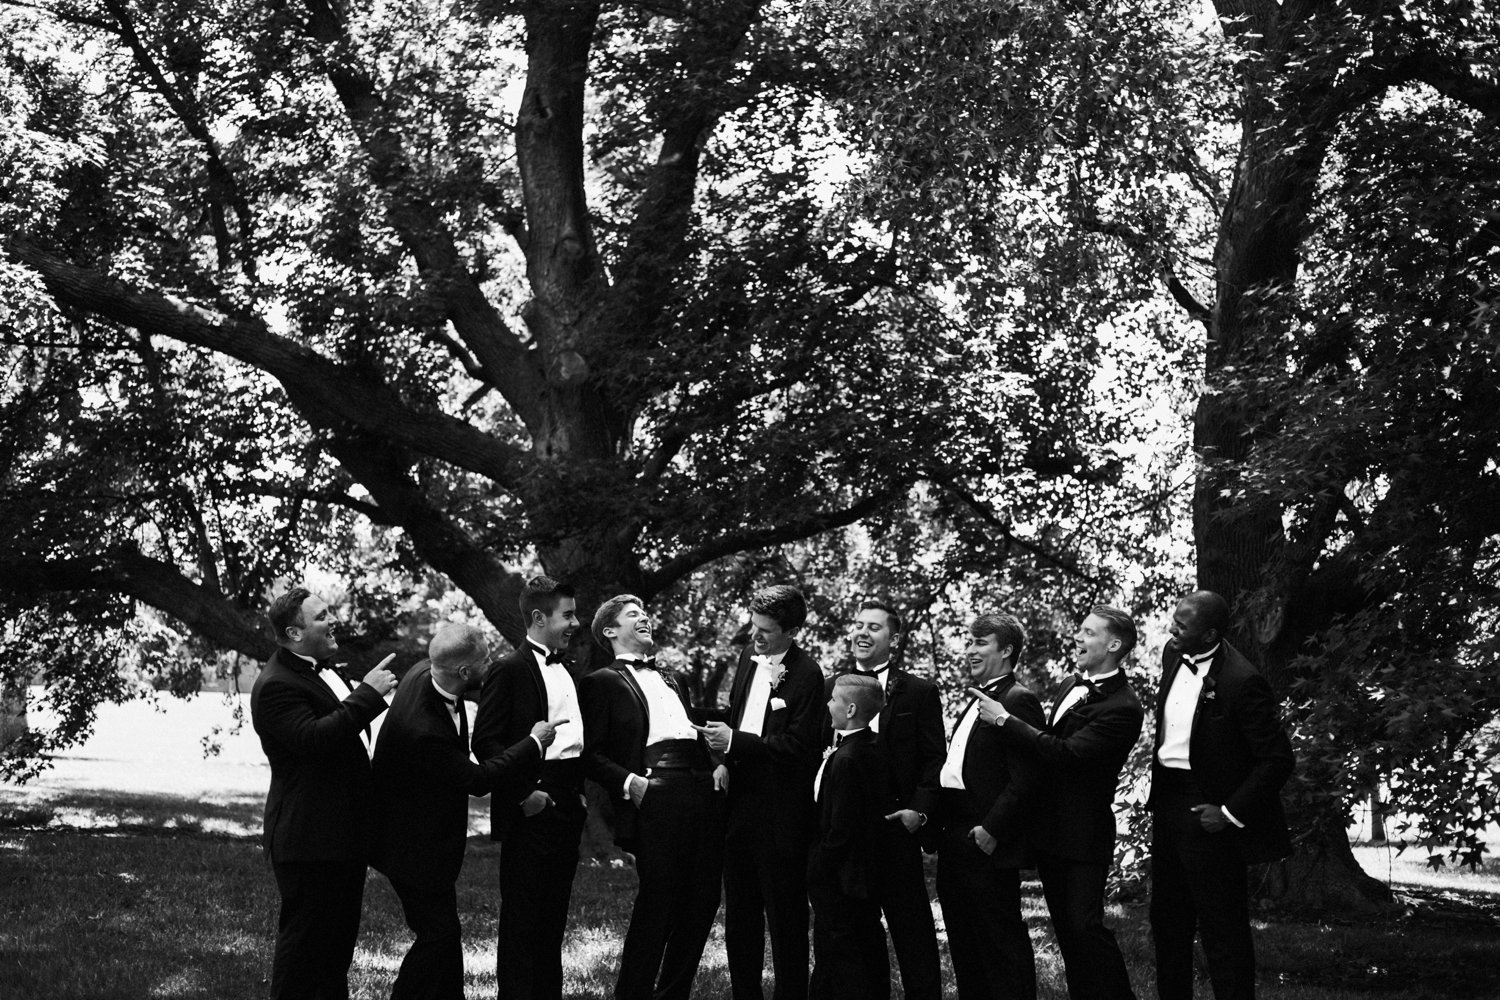  images by feliciathephotographer.com | destination wedding photographer | kansas city | summertime | classic | groomsmen portrait | black and white | loose park | contrast | nature | tuxedo | mens warehouse | ring barrier | laughter | silly | 